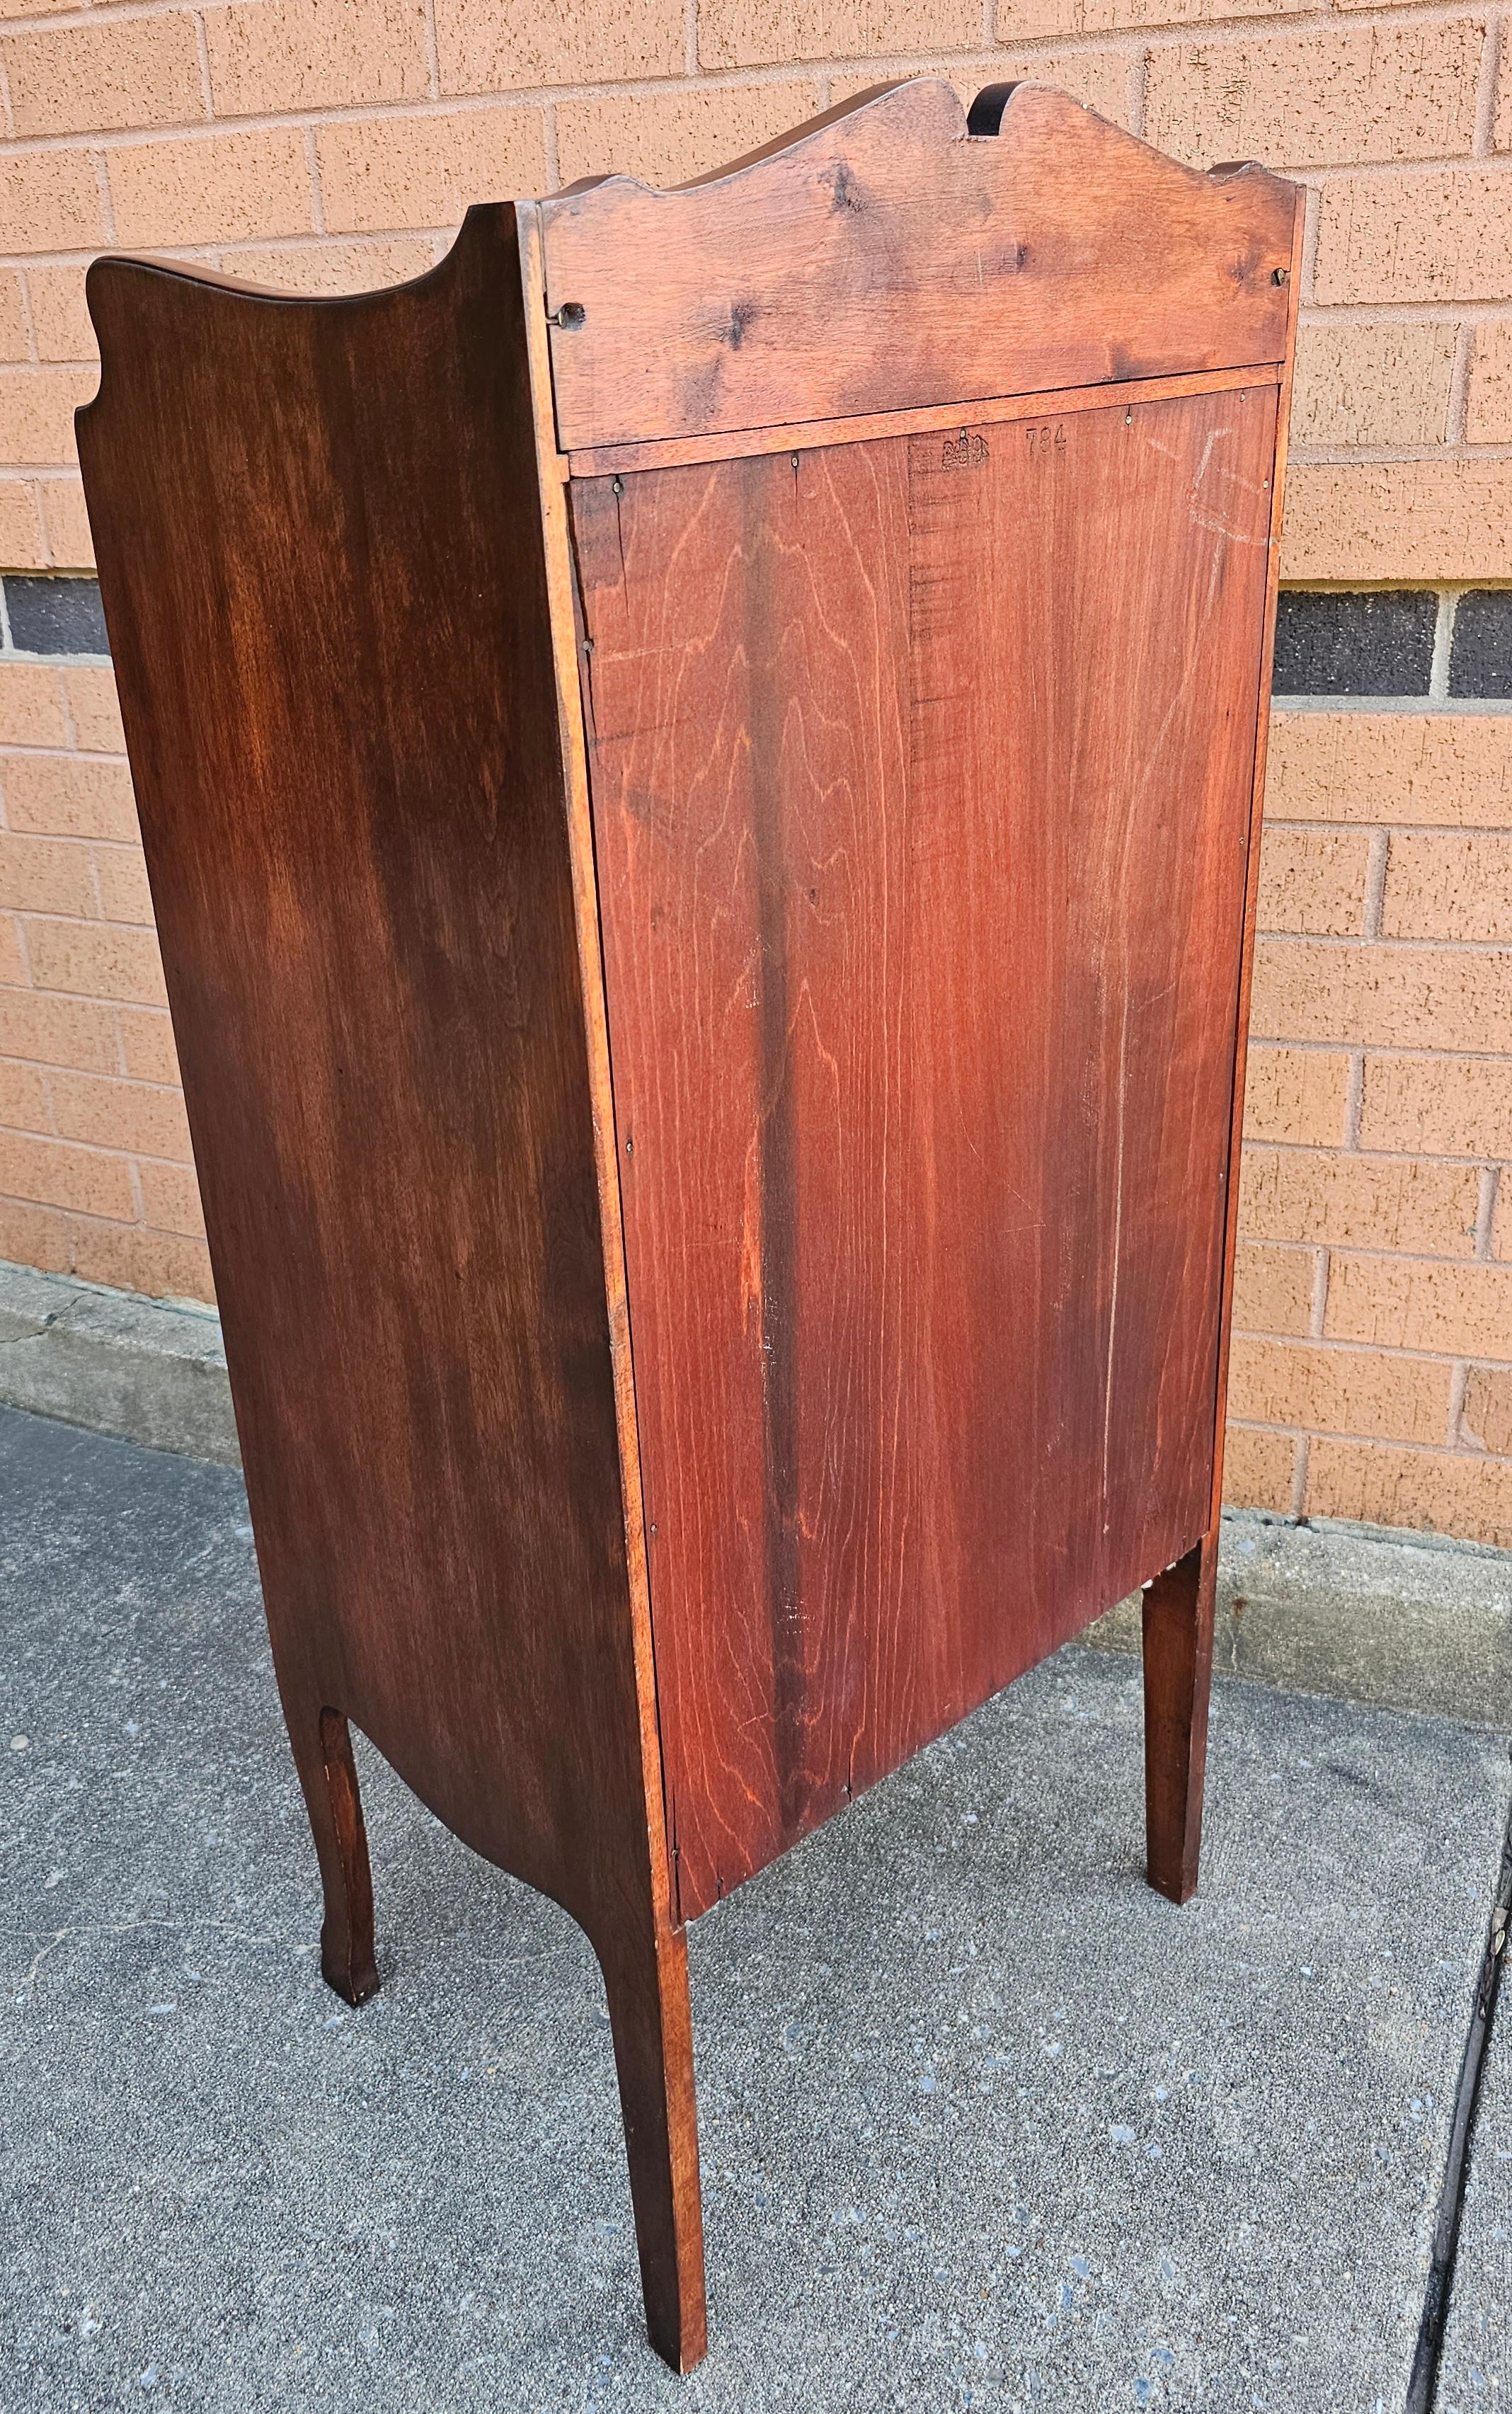 1930s Refinished Edwardian Mahogany and Satinwood Inlaid Sheet Music Cabinet For Sale 9